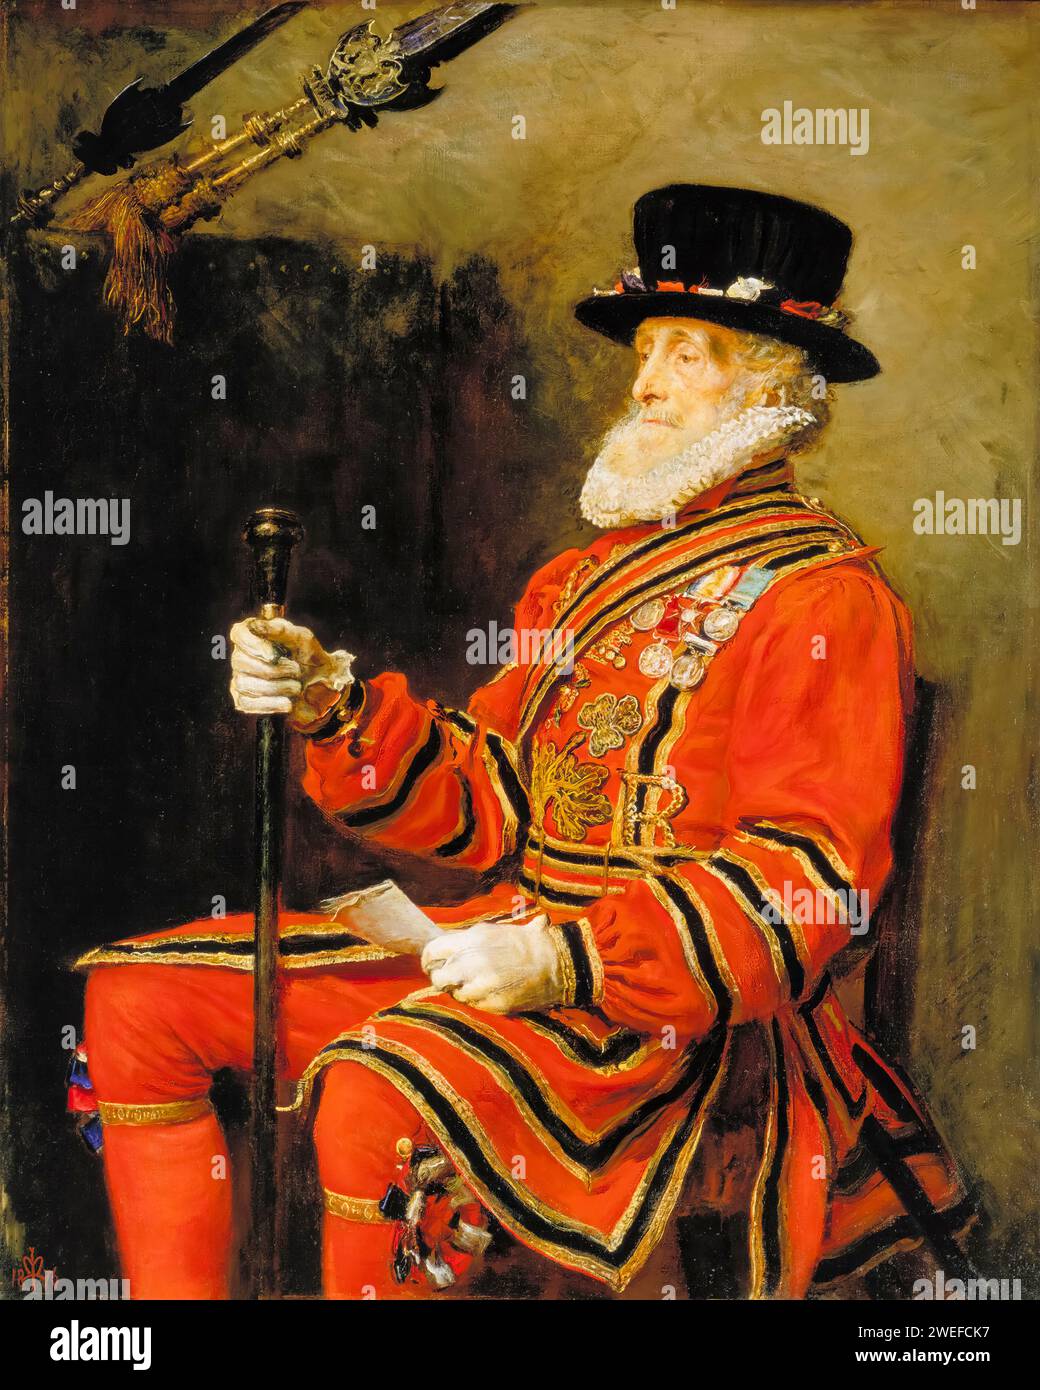 The Yeoman of the Guard (Beefeater, Corporal John Charles Montague), portrait painting in oil on canvas by Sir John Everett Millais, 1876 Stock Photo